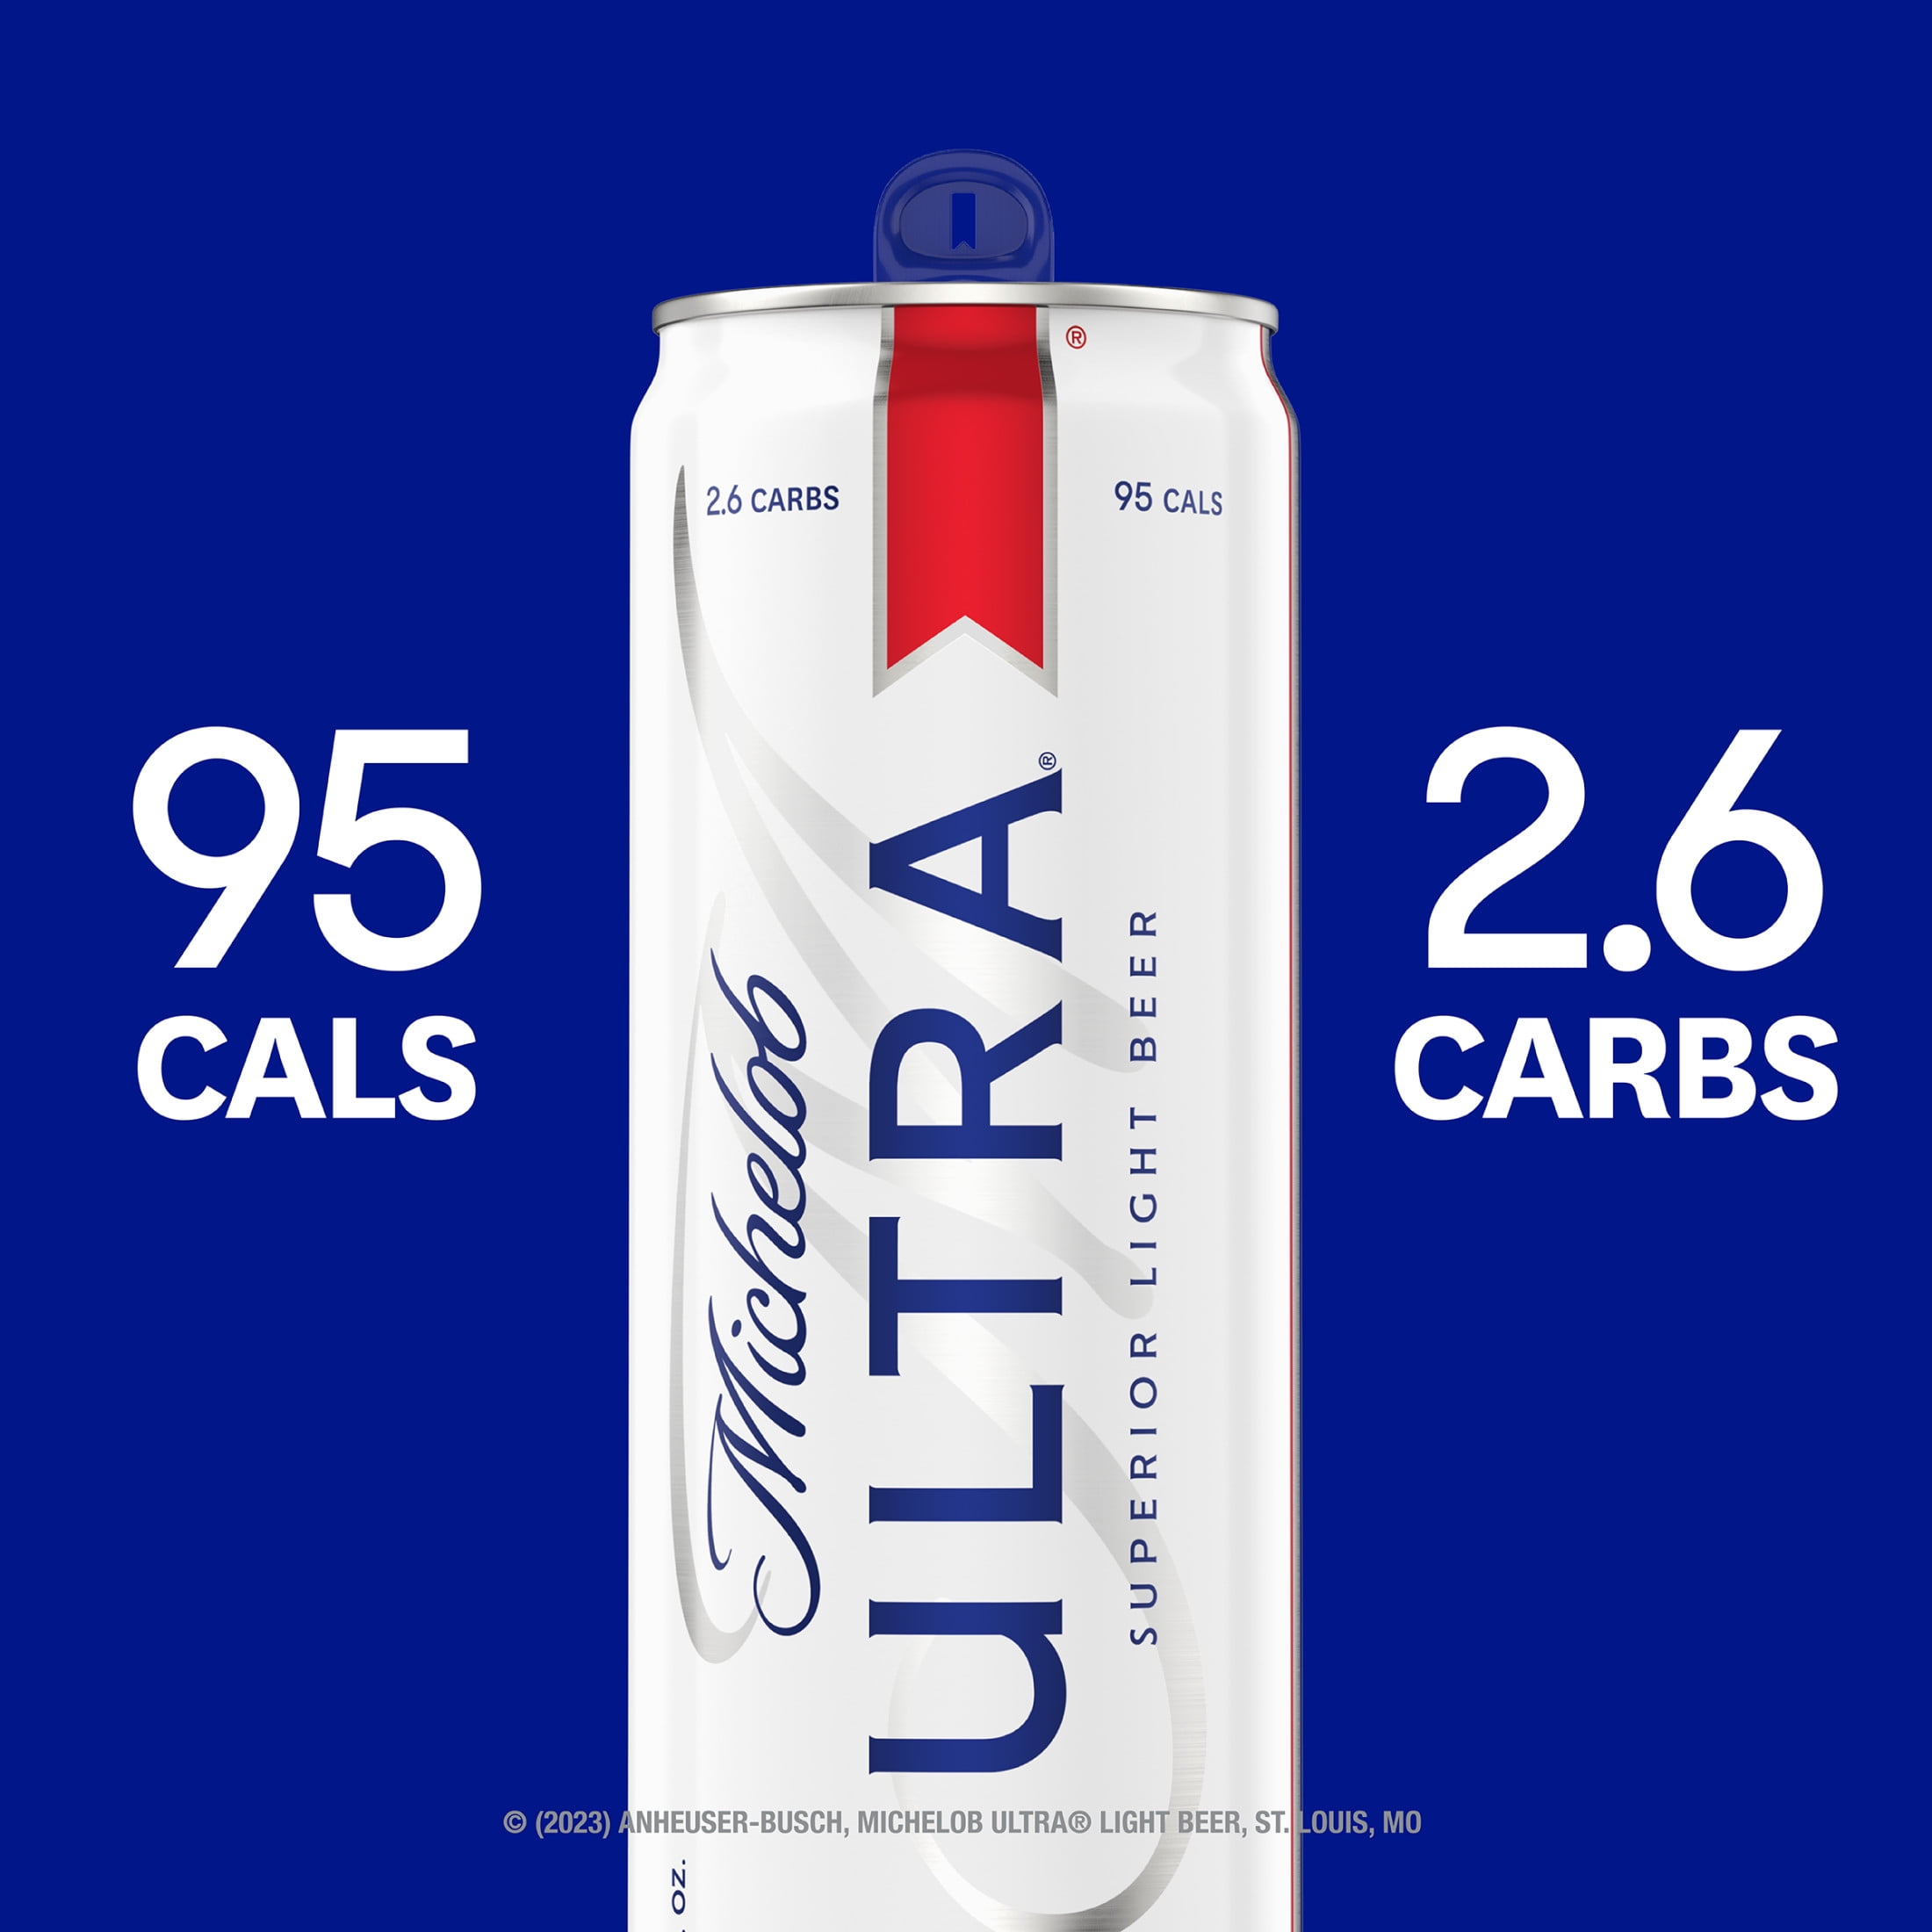 Michelob Ultra Superior Light Lager Beer, 12 cans / 12 fl oz - Ralphs